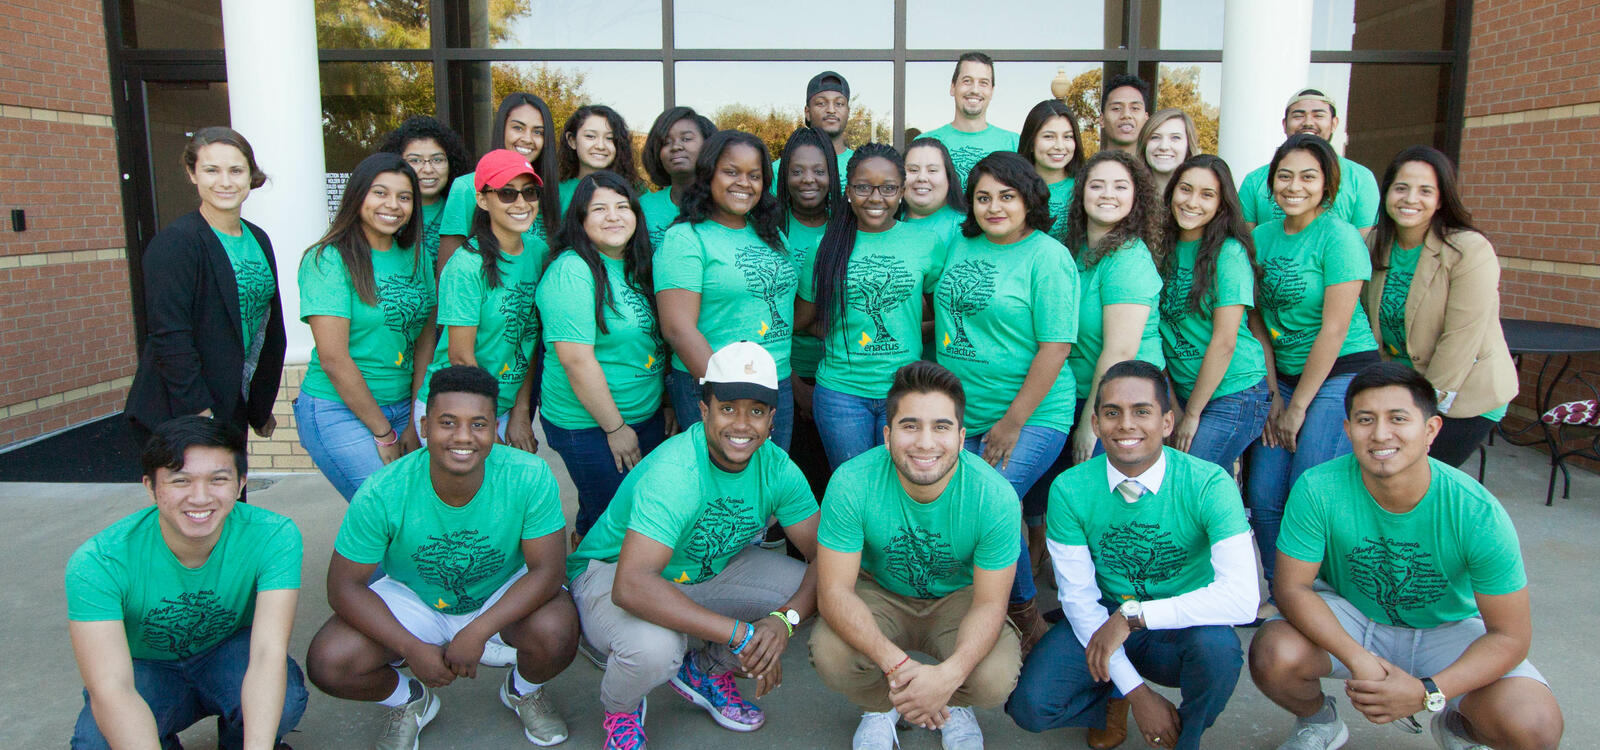 Dressed in matching green t-shirts, a group students stand in four rows and smile